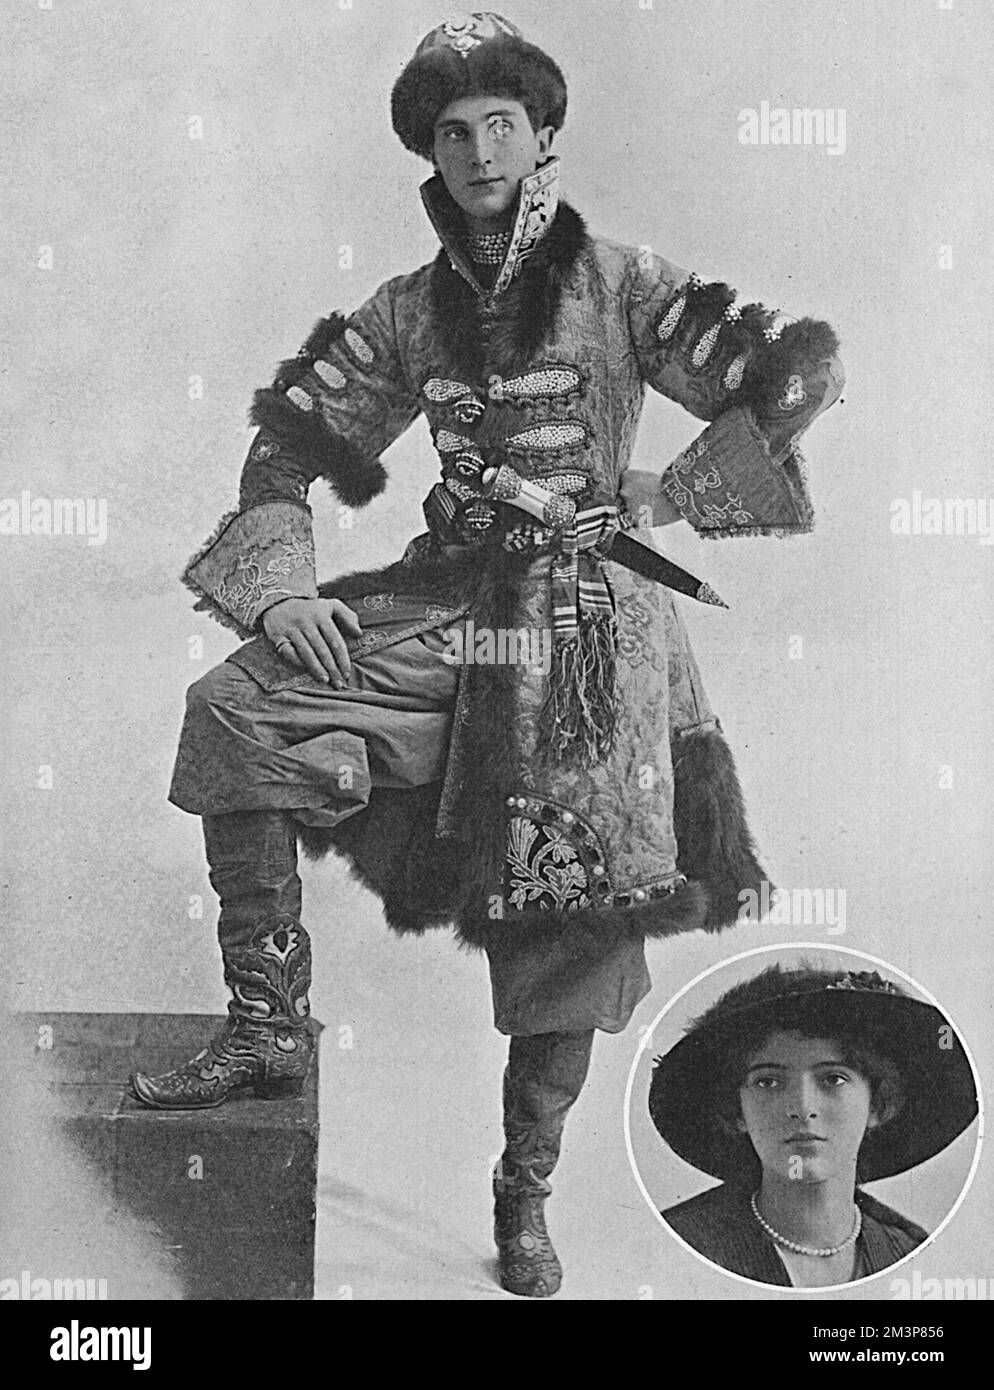 Princess Irina Youssoupoff, niece of Tsar Nicholas II and wife of Felix Youssoupoff who is pictured in a fancy dress costume. Prince Felix Youssoupoff came from a wealthy, aristocratic Russian family (1886-1967) and was a distant relative of the Tsar. In 1916, along with four other Russian aristocrats, he was responsible for the murder of Grigori Rasputin, the holy monk who exerted heavy influence on the Imperial couple, particularly the Tsaritsa, Alexandra who believe Rasputin could cure her haemophiliac son, Alexei. Youssopoff's memoirs report on the murder of Rasputin vividly and perhaps ex Stock Photo